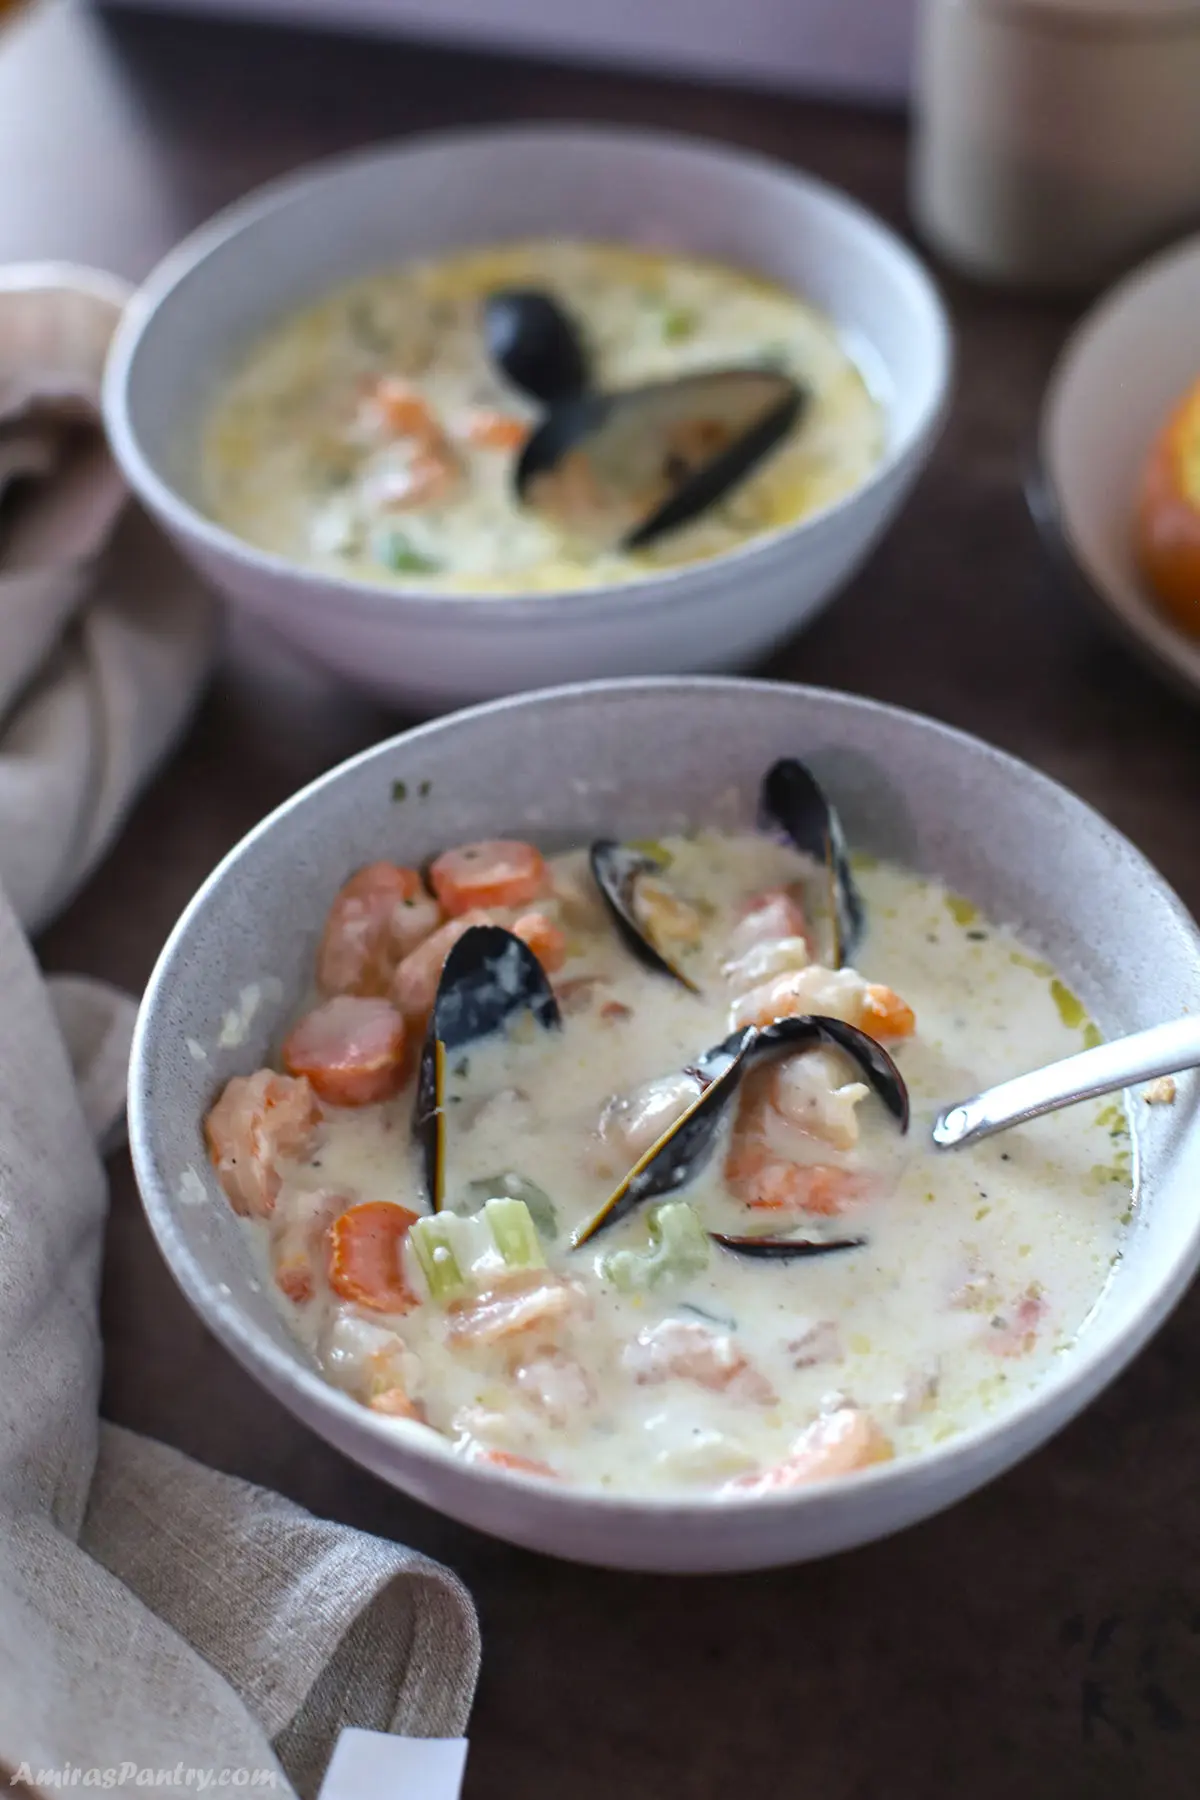 Two bowls of creamy seafood soup on a dark surface.